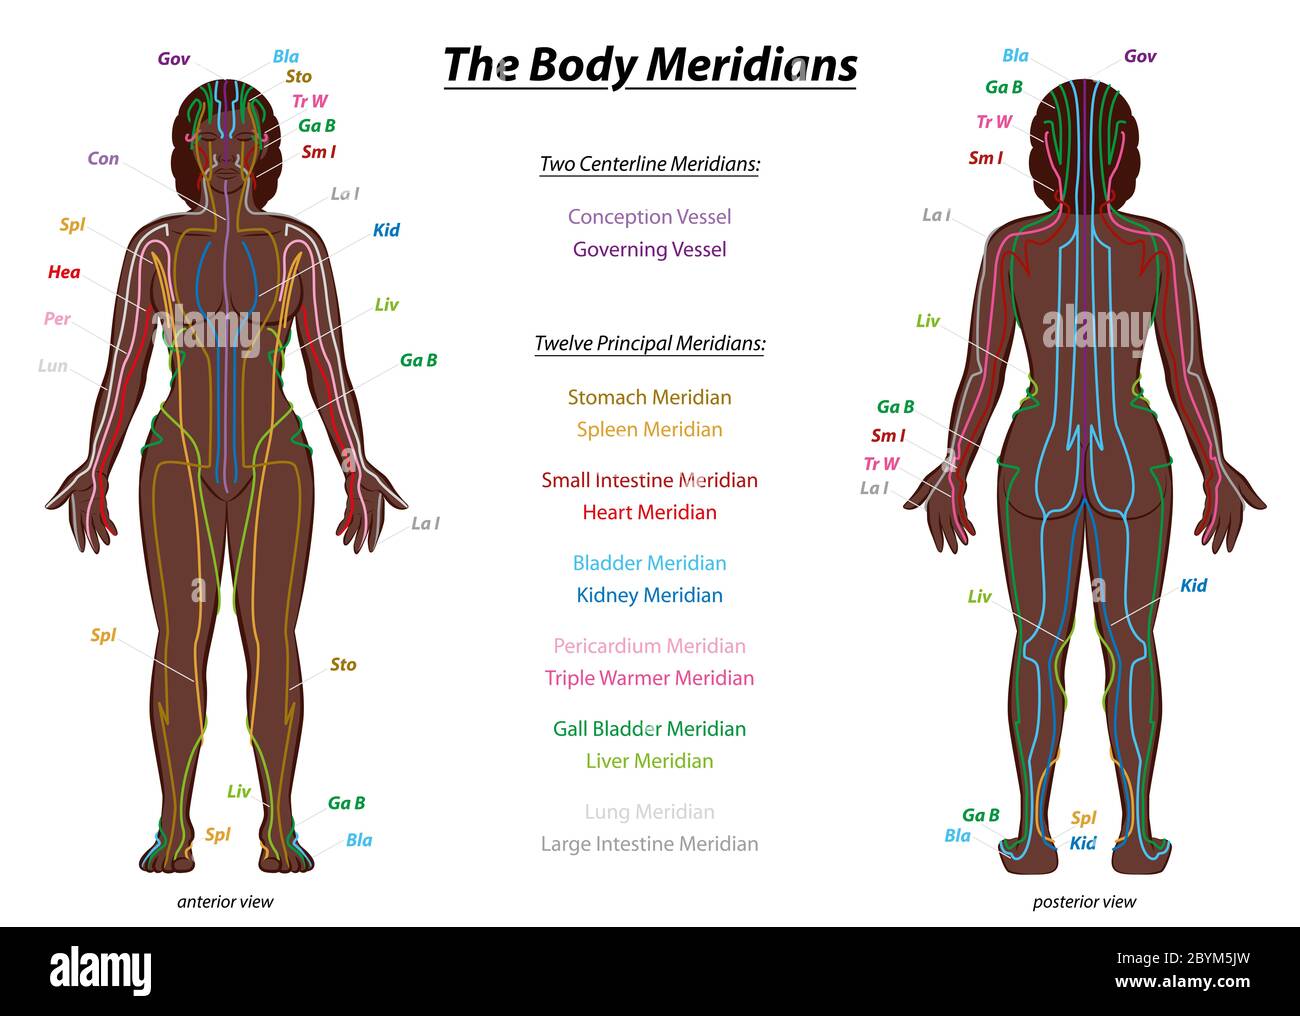 MERIDIAN SYSTEM CHART, black woman, female body with labelled meridians - anterior and posterior view - Traditional Chinese Medicine. Stock Photo